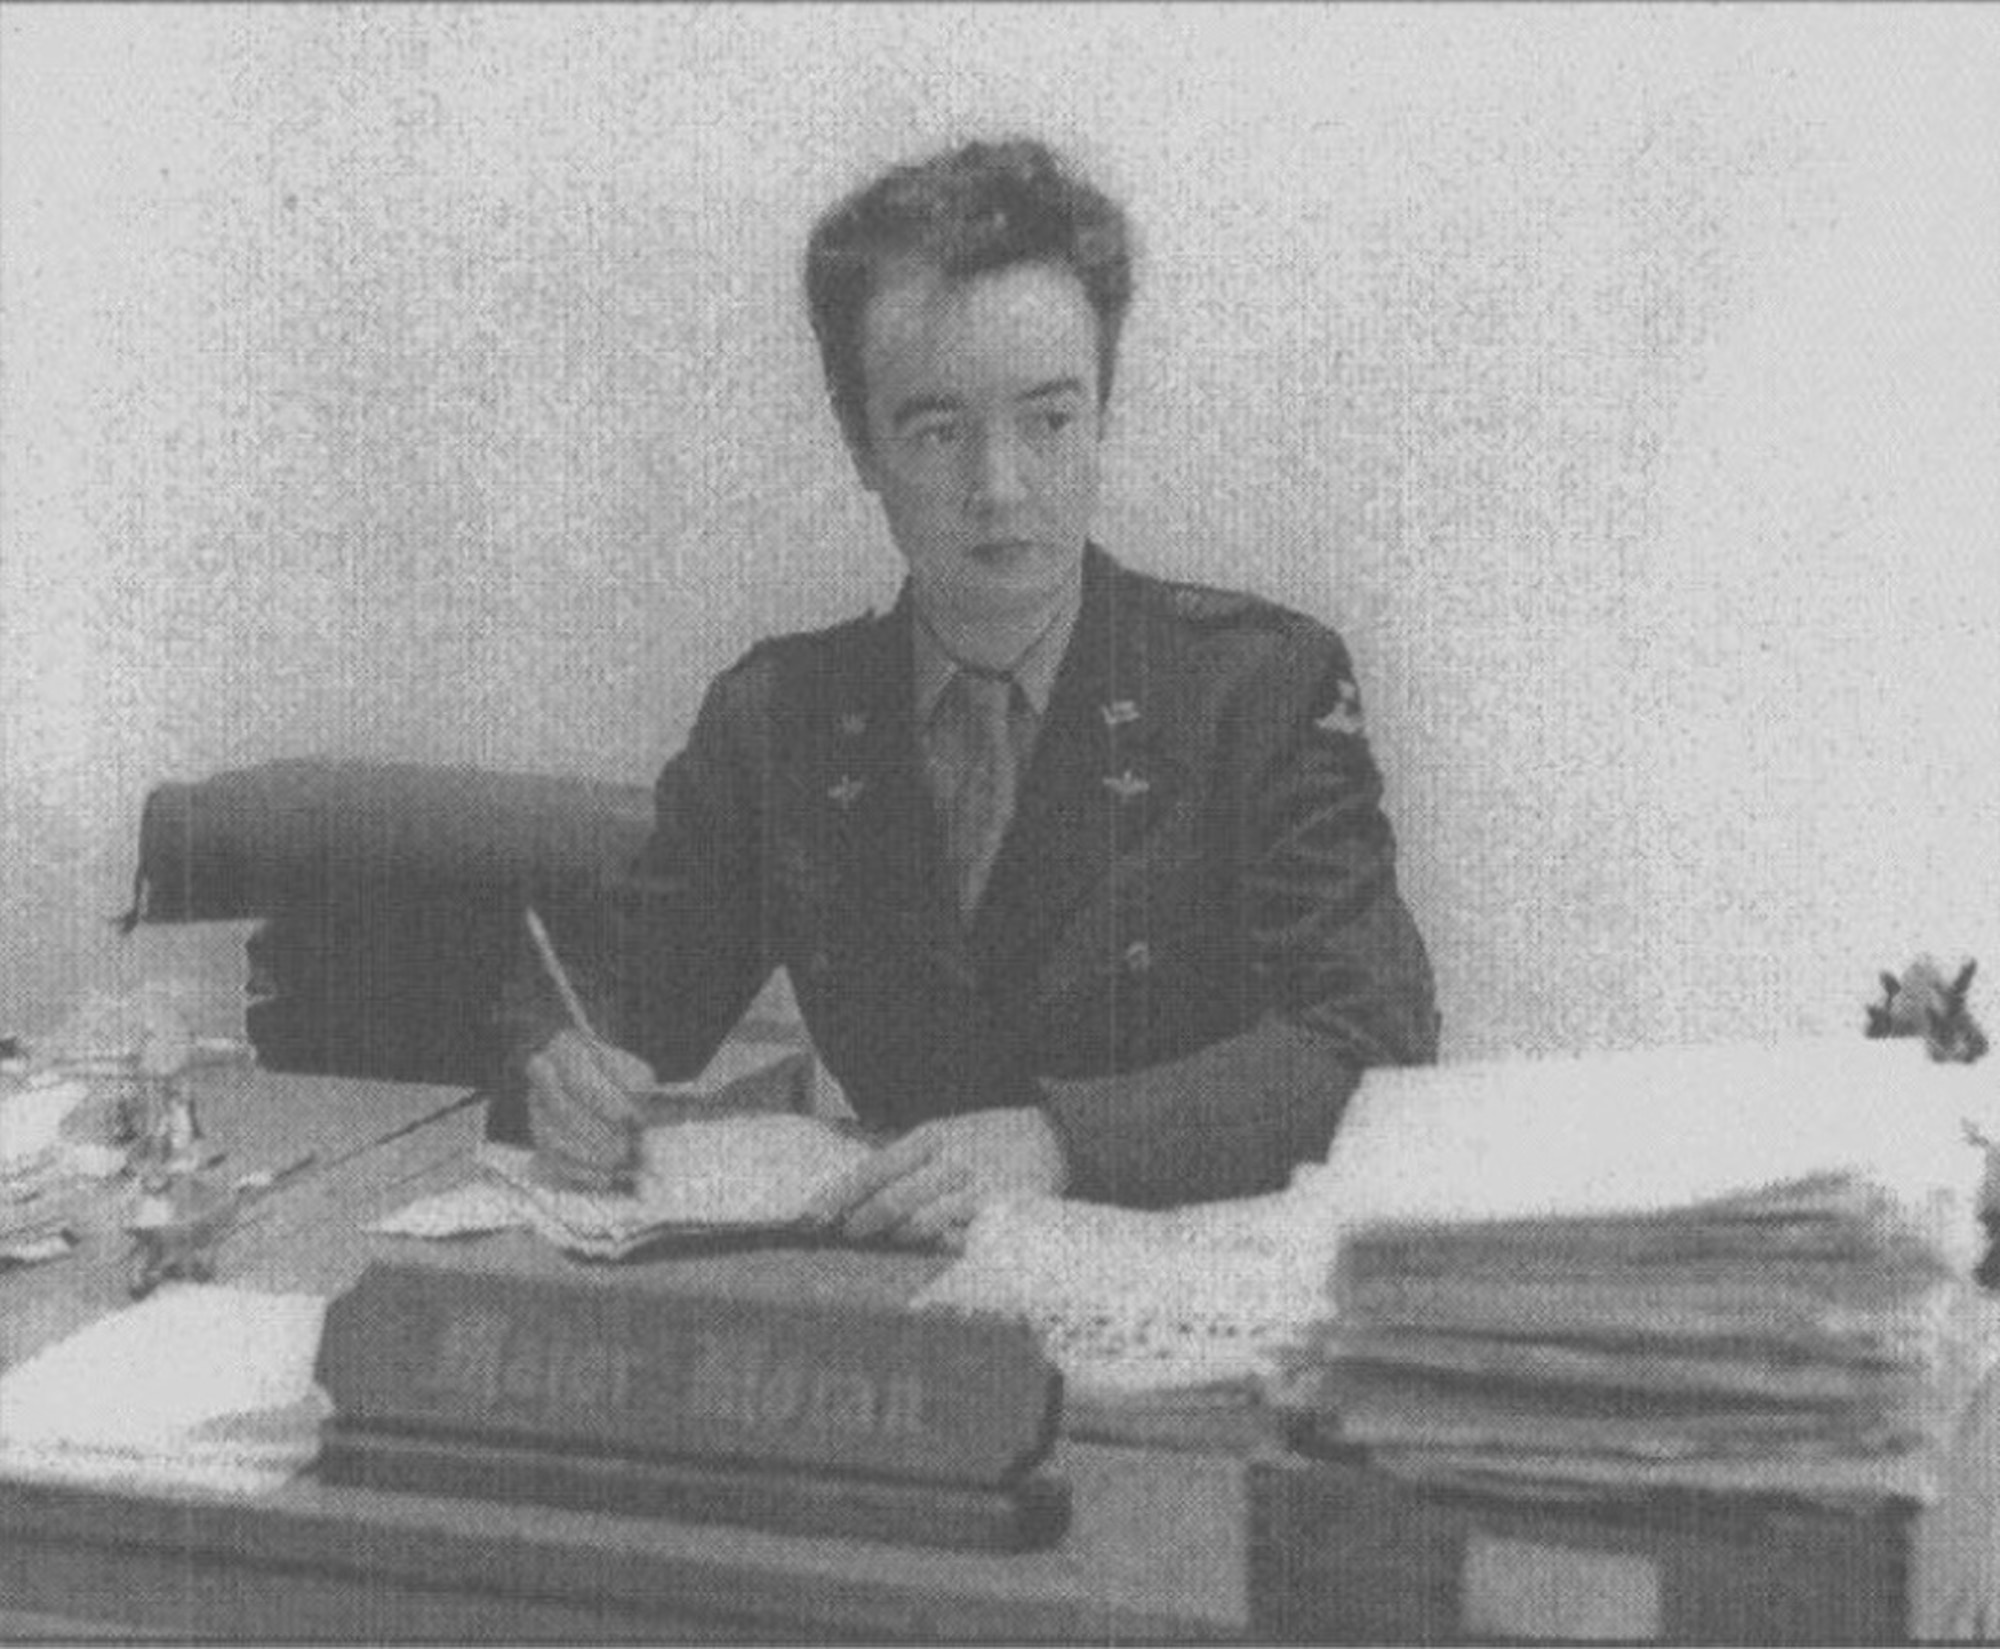 To date, the first woman known to serve as a special agent within the Office of Special Investigations was Maj. Catherine M. Moran, who was most likely assigned to the Office of Investigations sometime during the first half of 1949 as District 6 Operations Chief in Tokyo, Japan. (U.S. Air Force photo)